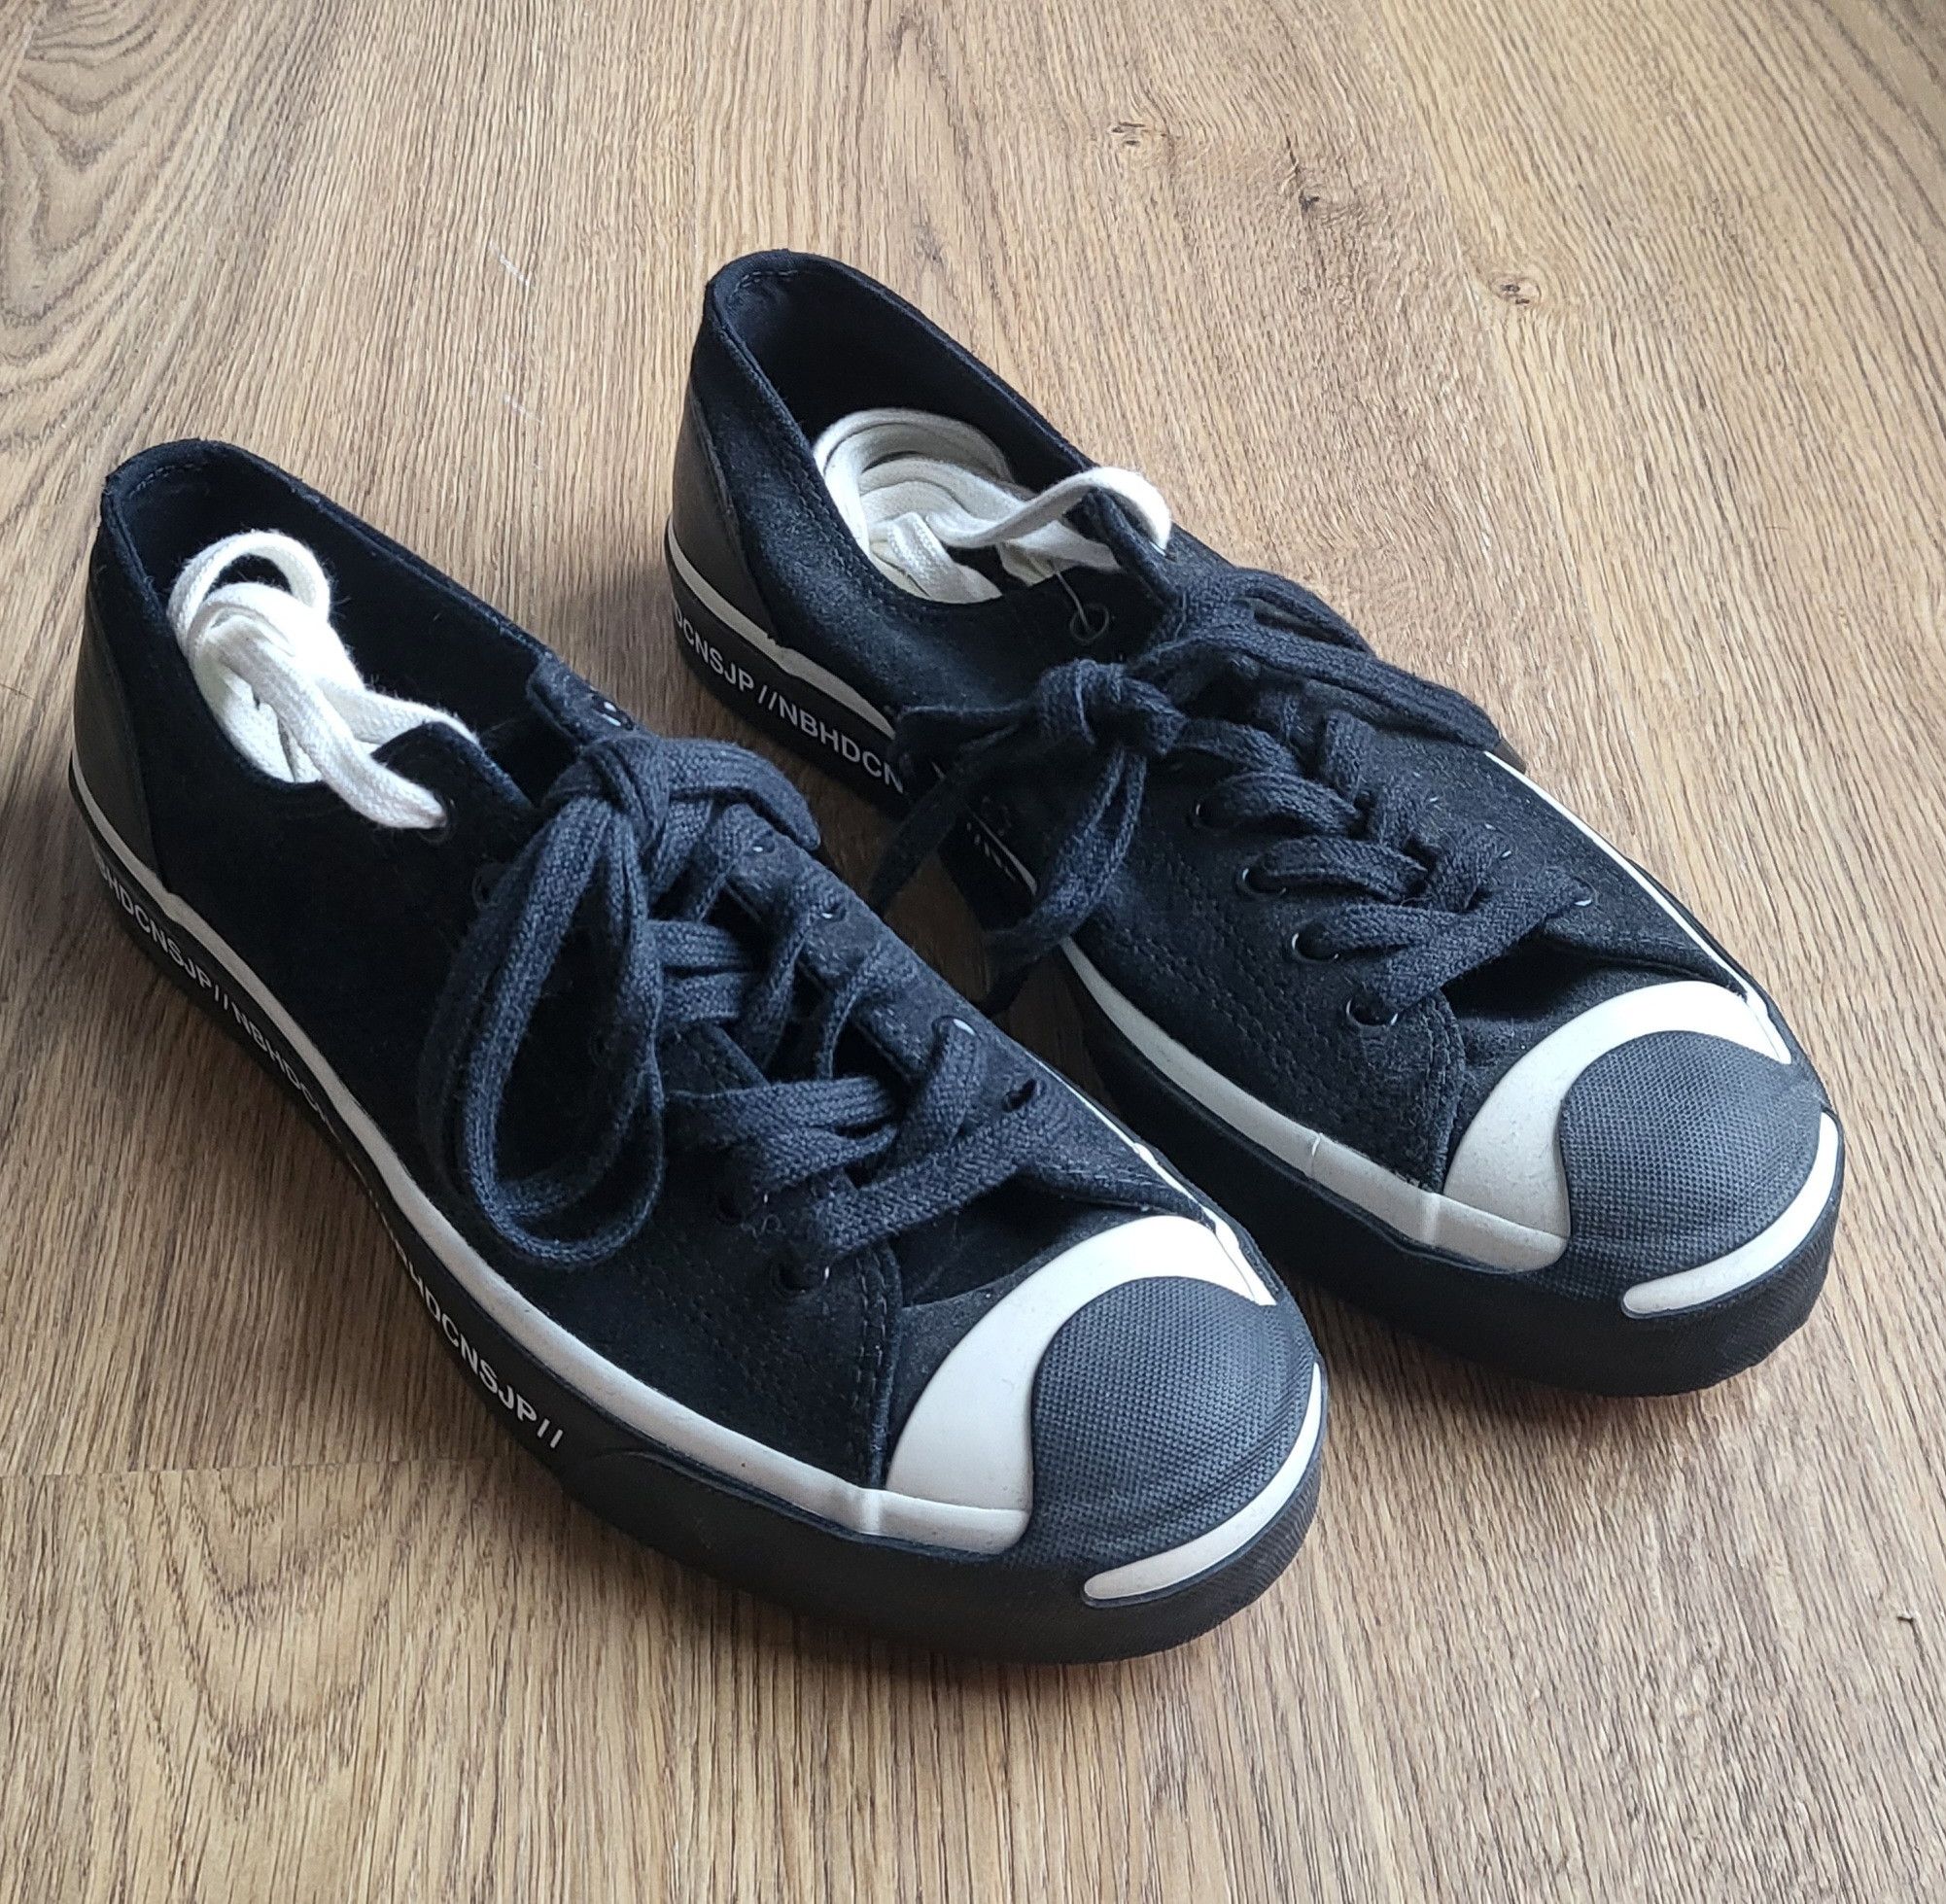 Converse Converse Jack Purcell Ox Neighborhood Motorcycle | Grailed